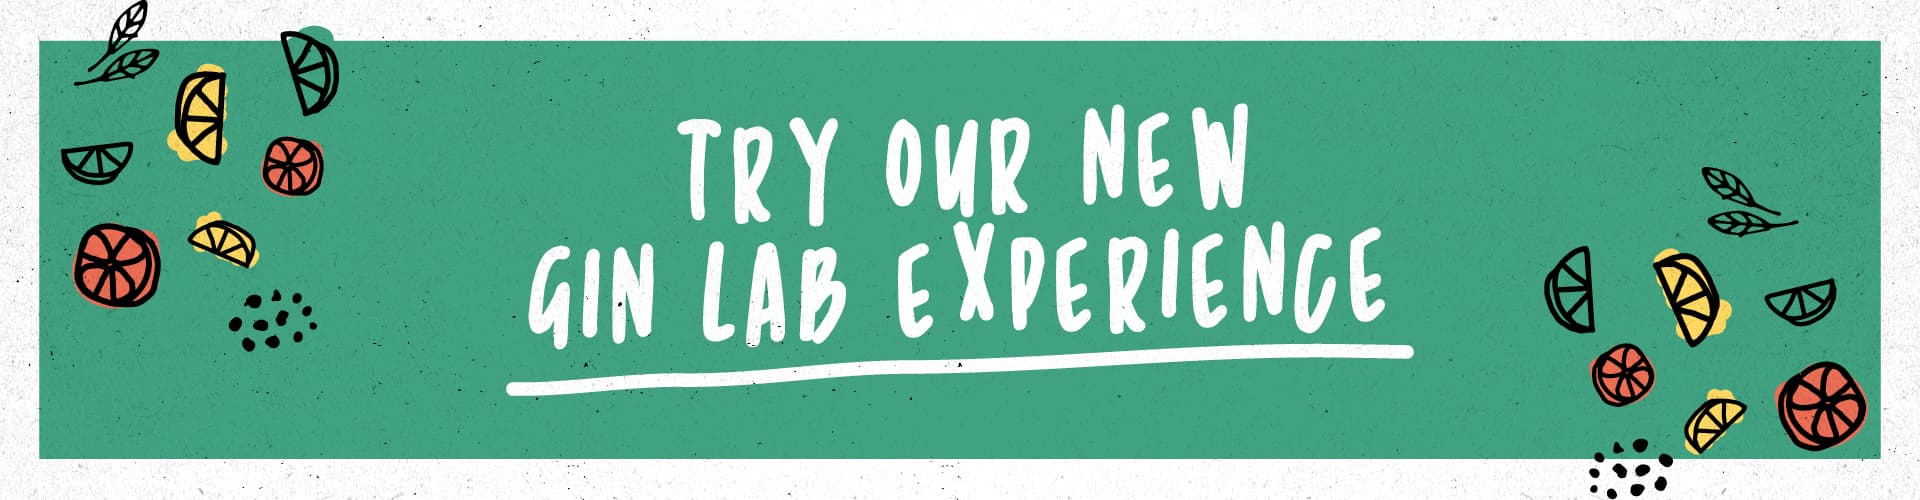 Try our new gin lab experience!